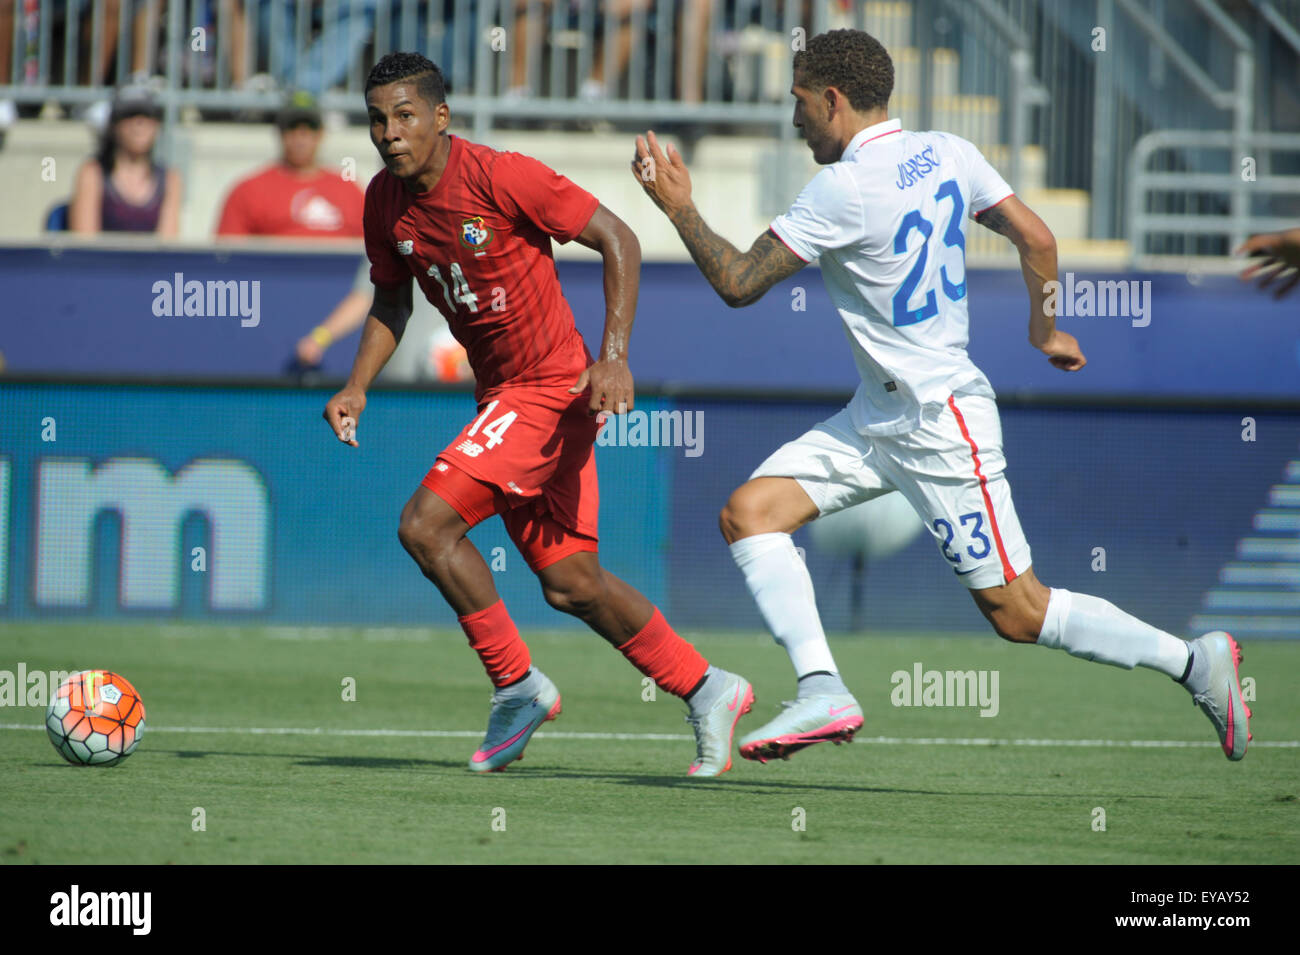 Chester, Pennsylvania, USA. 25th July, 2015. USA player FABIAN JOHNSON (23) in action against PANAMA player MIGUEL CAMARGO, (14) in the third place match which was played at PPL Park in Chester Pa (Credit Image: © Ricky Fitchett via ZUMA Wire) Stock Photo